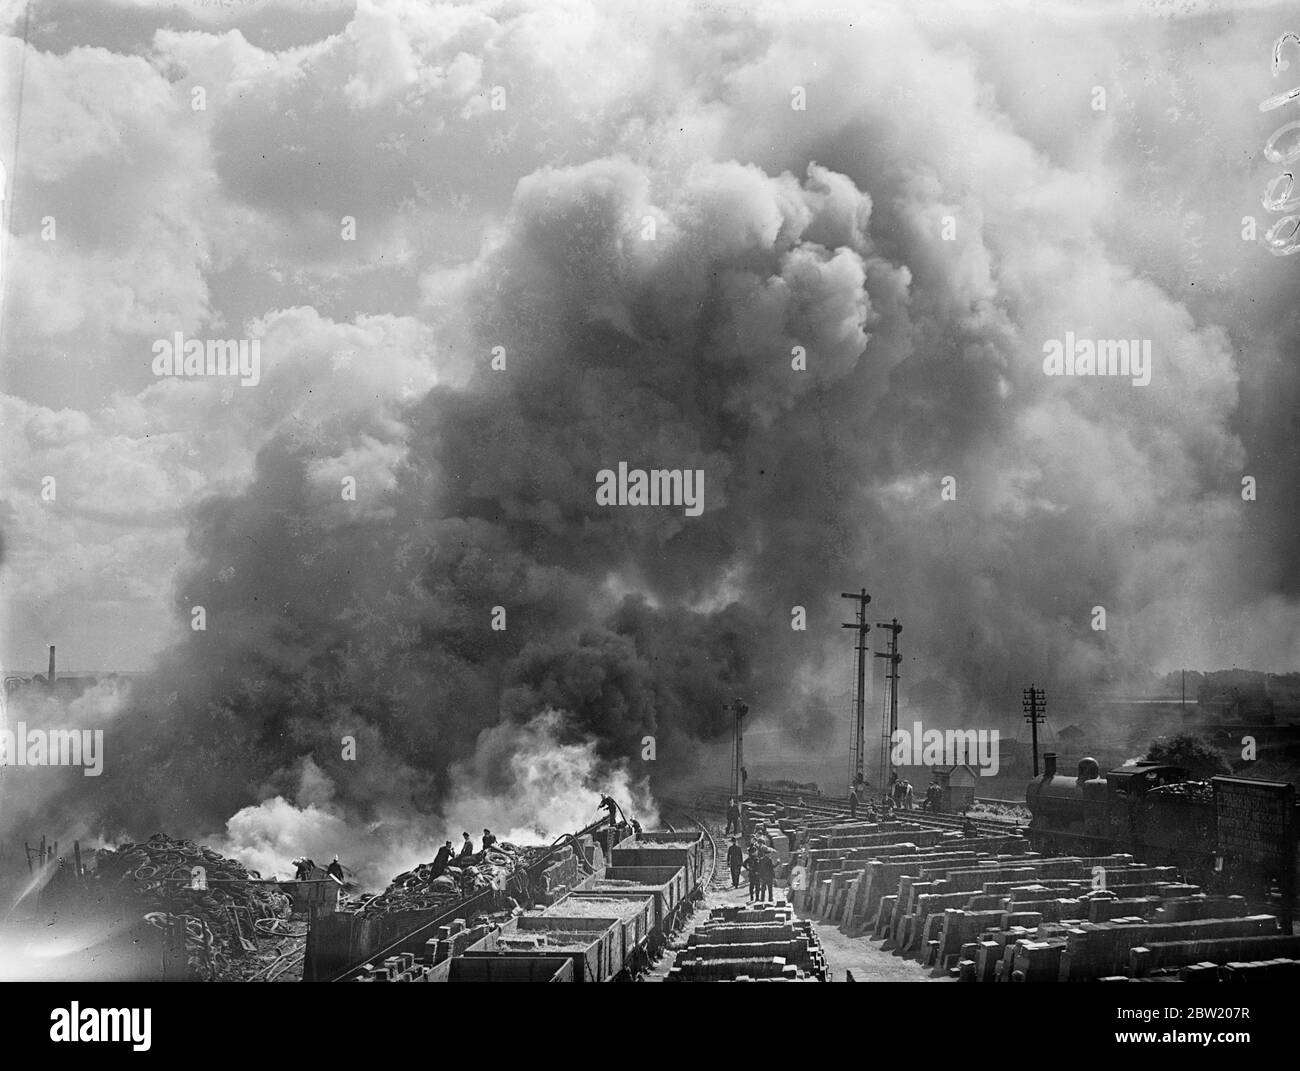 Dense clouds of smoke rising from the burning rubber as firemen fought the blaze which raged for hours at a rubber tyre dump in Markfield Road, Tottenham. 29 June 1937 Stock Photo